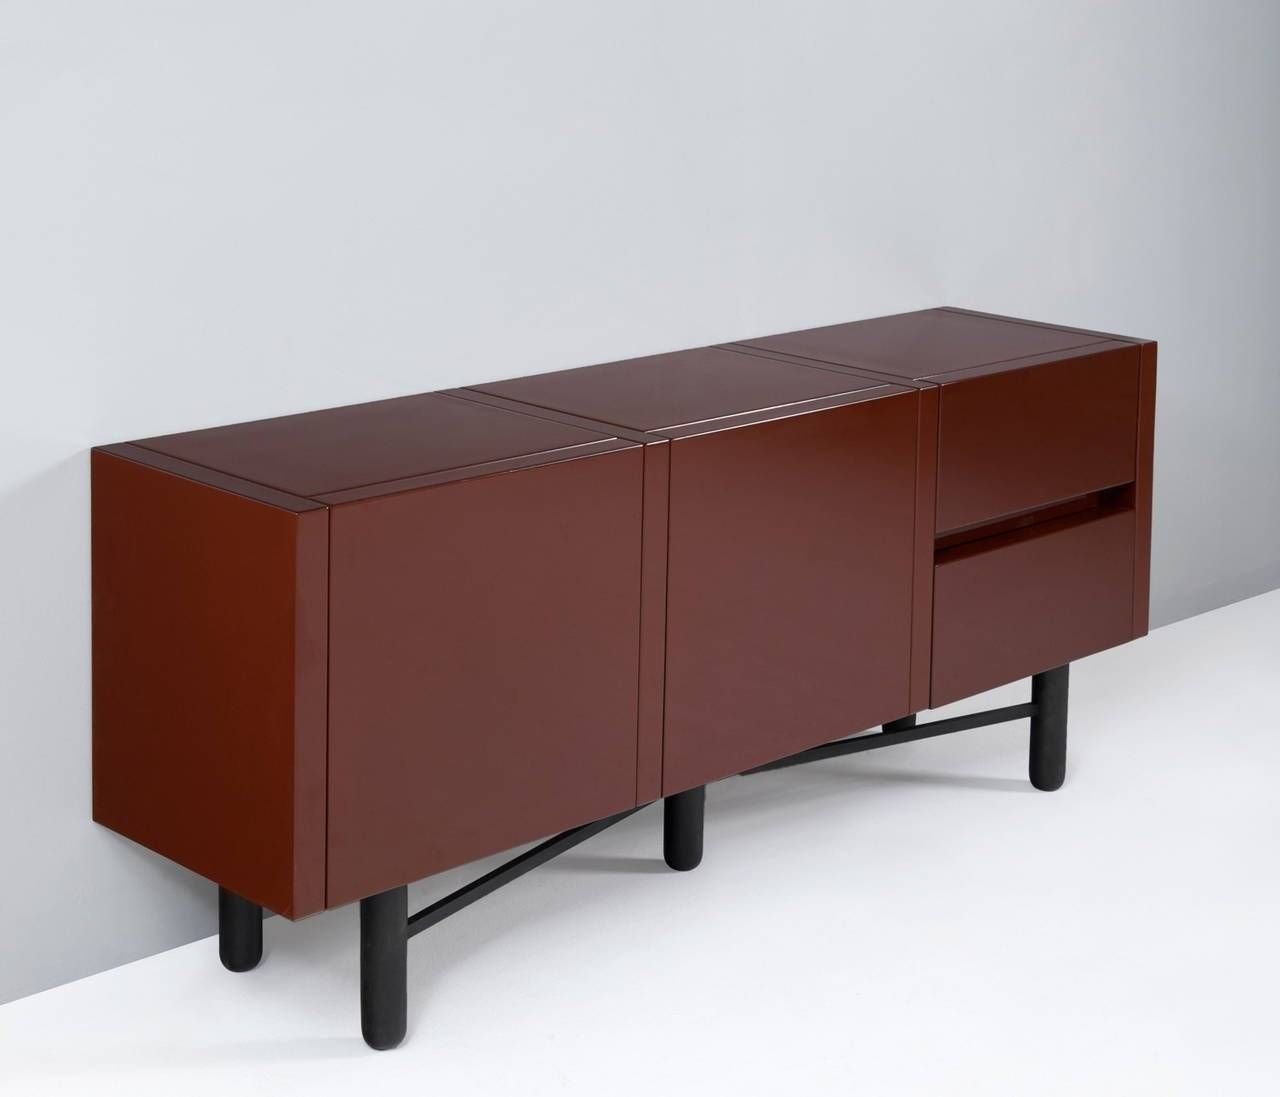 Roche Bobois Red Lacquered High Gloss Sideboard For Sale At 1stdibs With Regard To 2018 High Gloss Grey Sideboards (View 10 of 15)